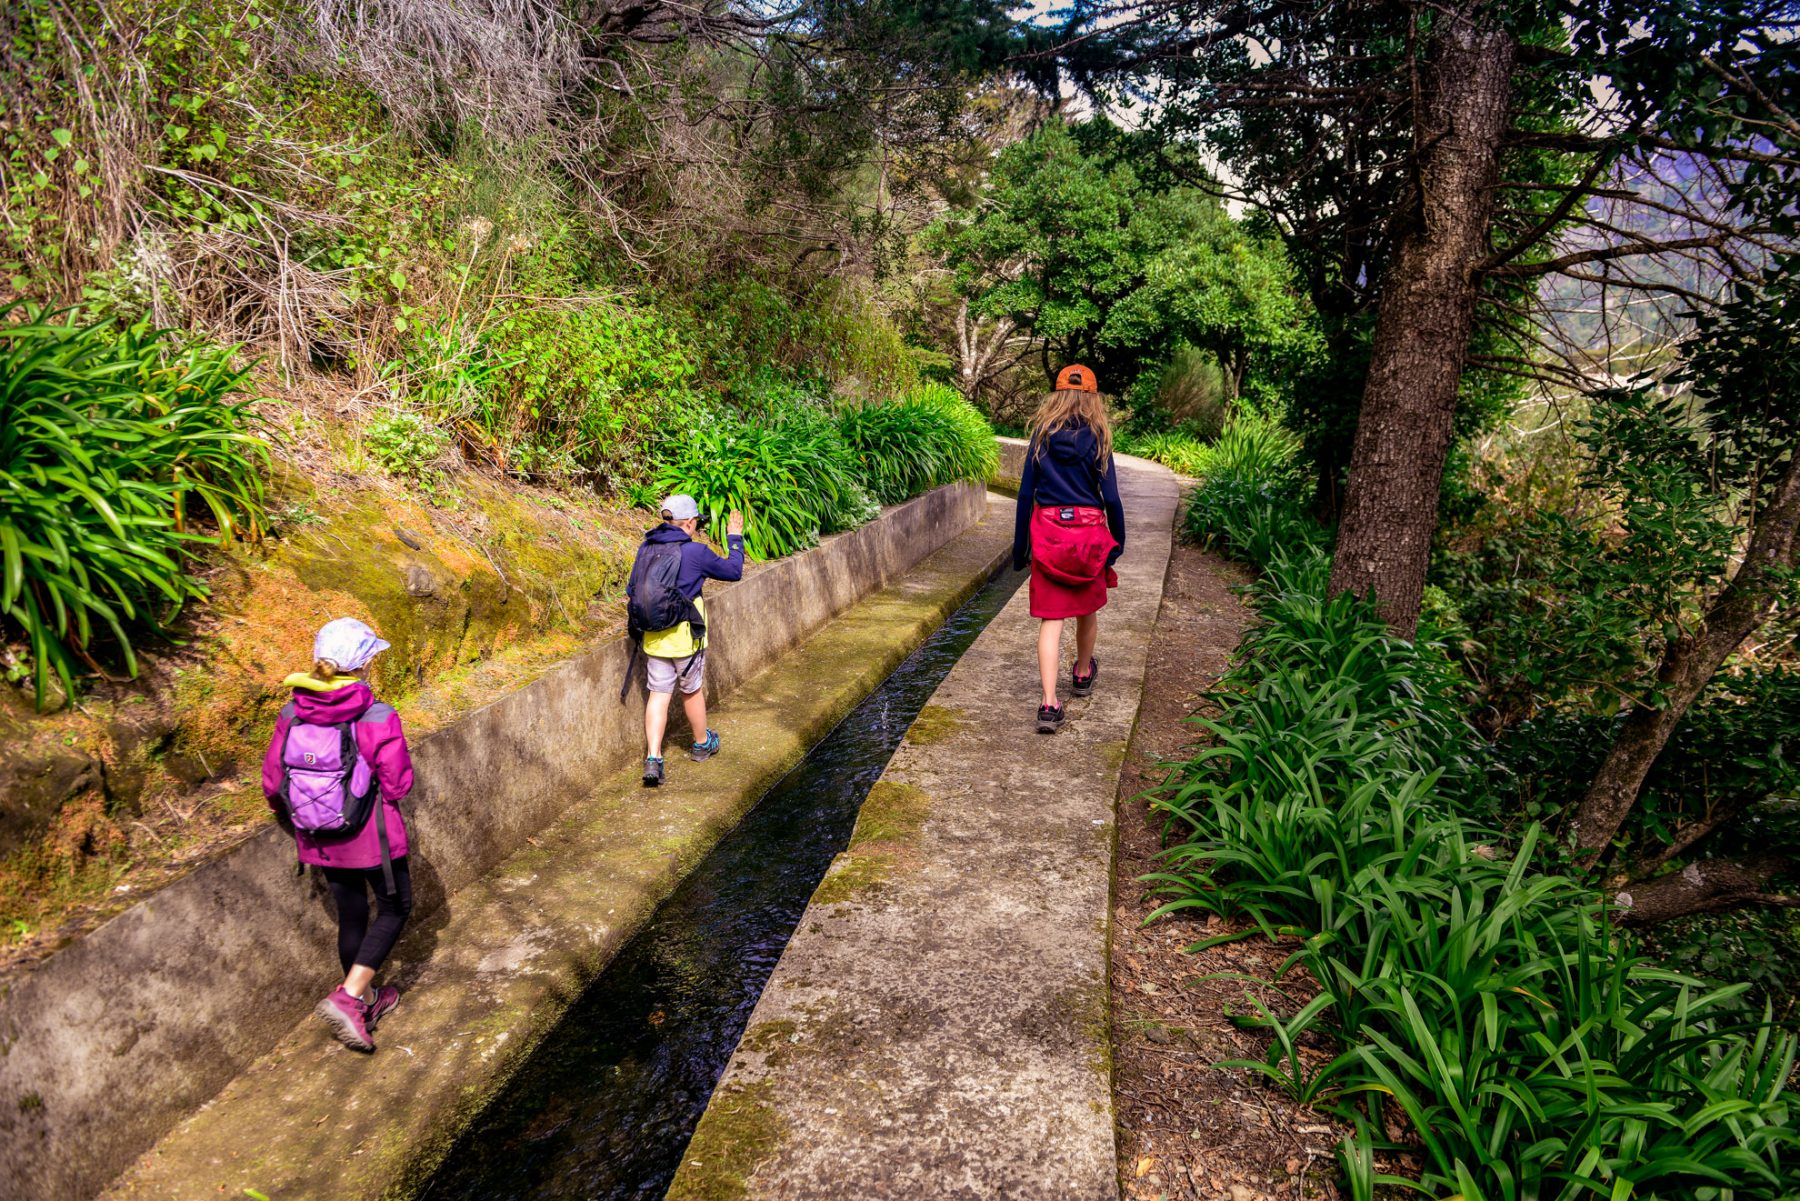 Play by the levada - Madeira